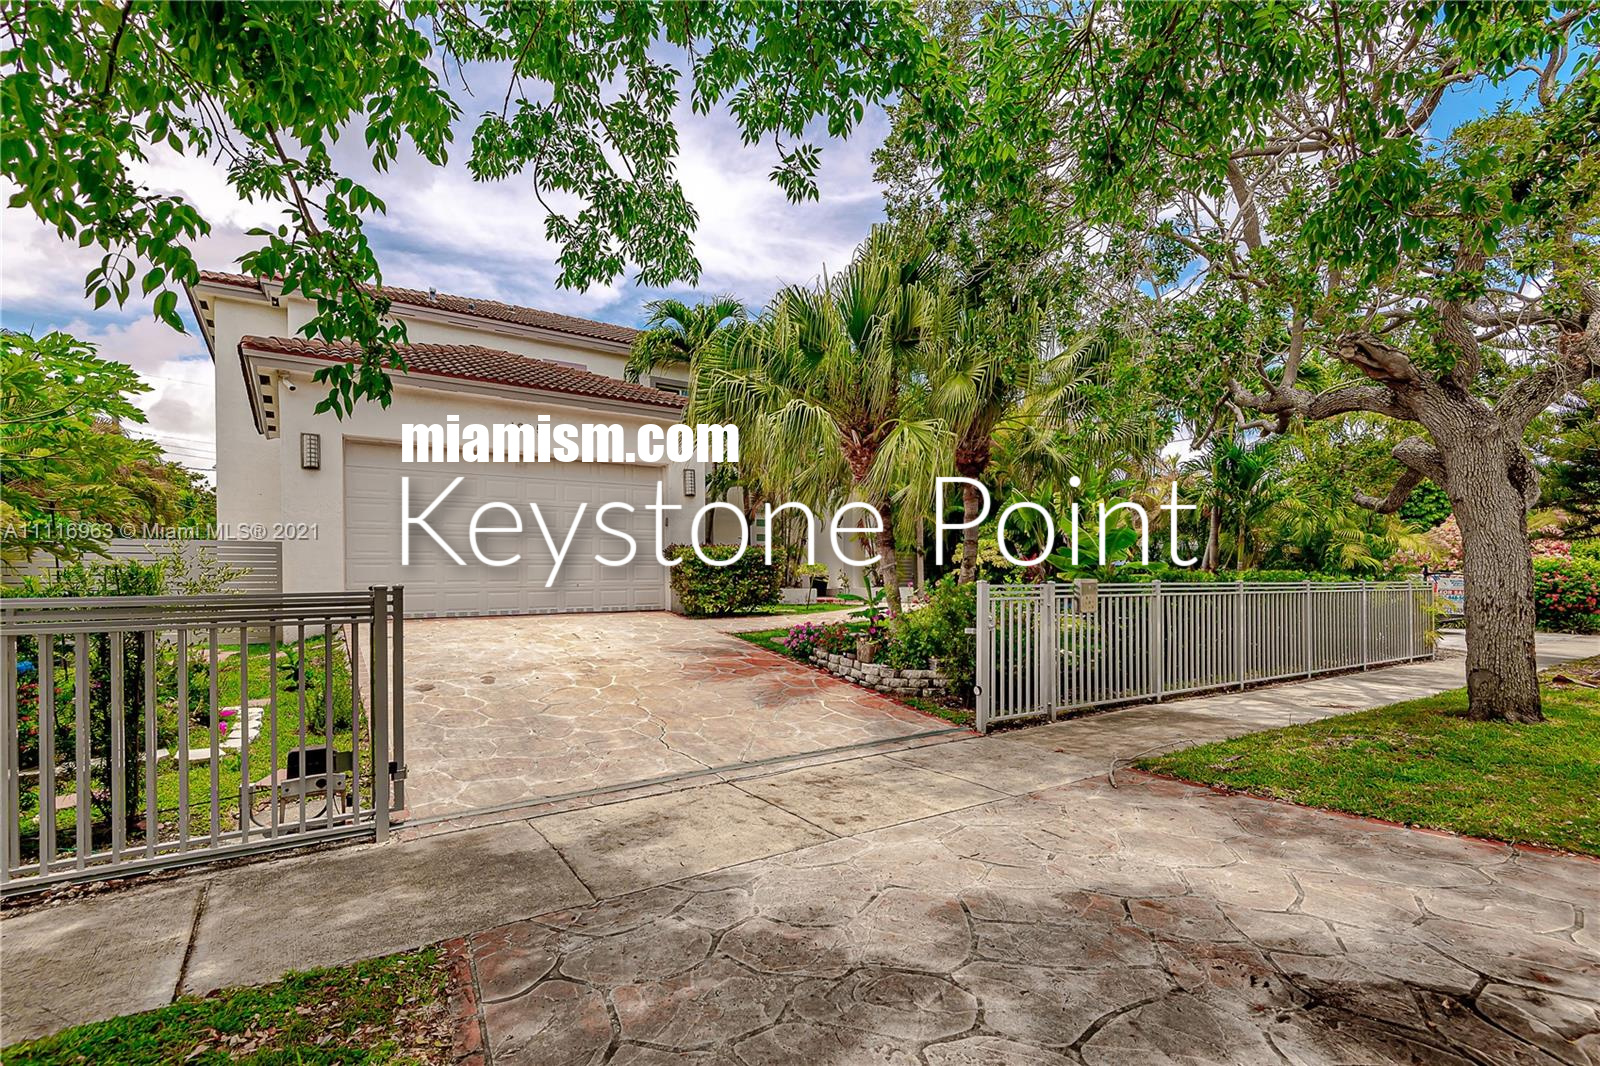 Keystone Point Home Sold for 1.62M